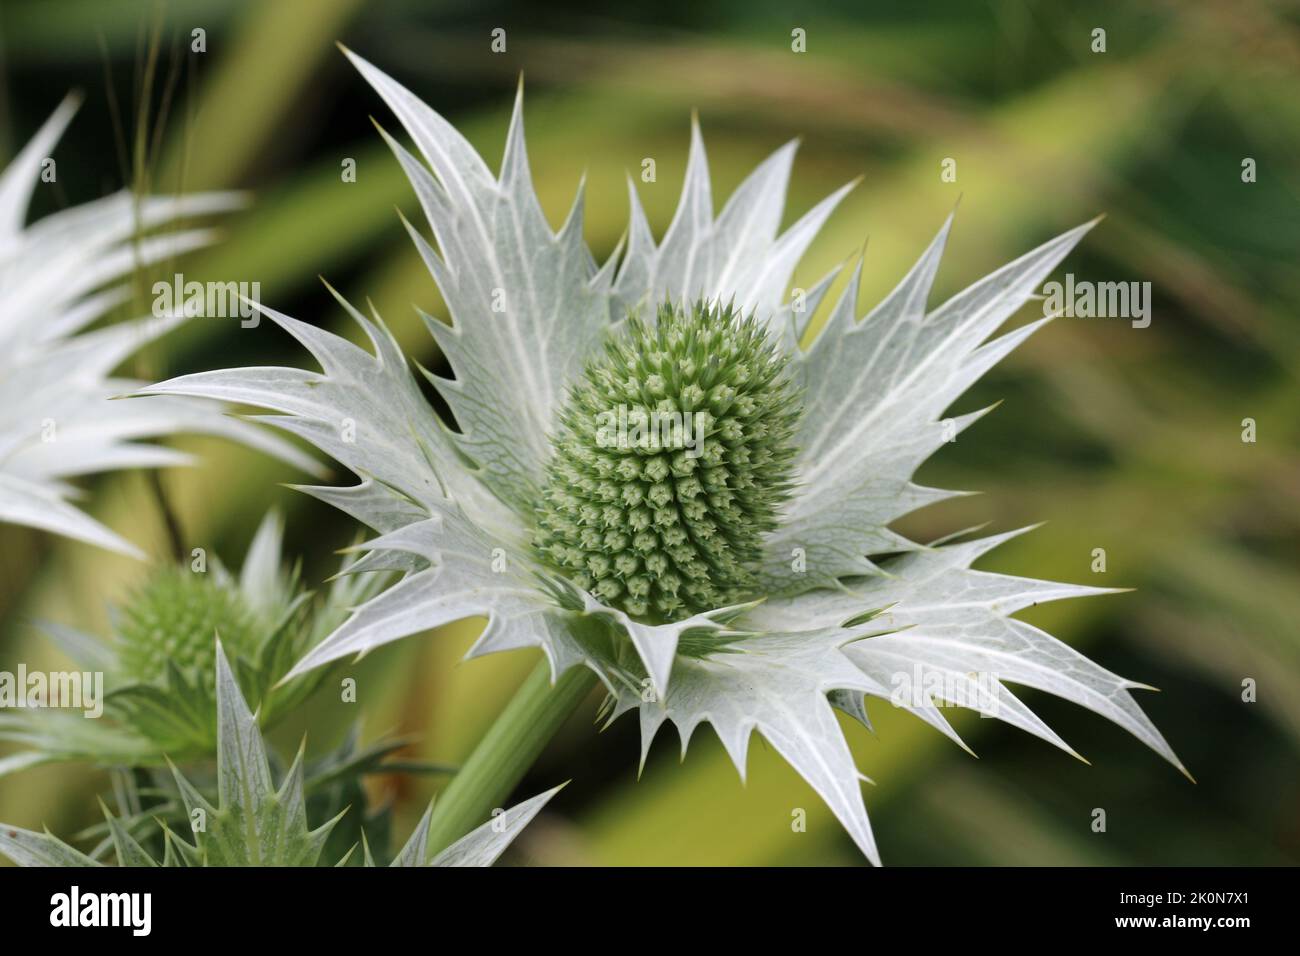 Ornamental sea holly, Eryngium species, green flowers with silver bracts and a blurred background of leaves. Stock Photo